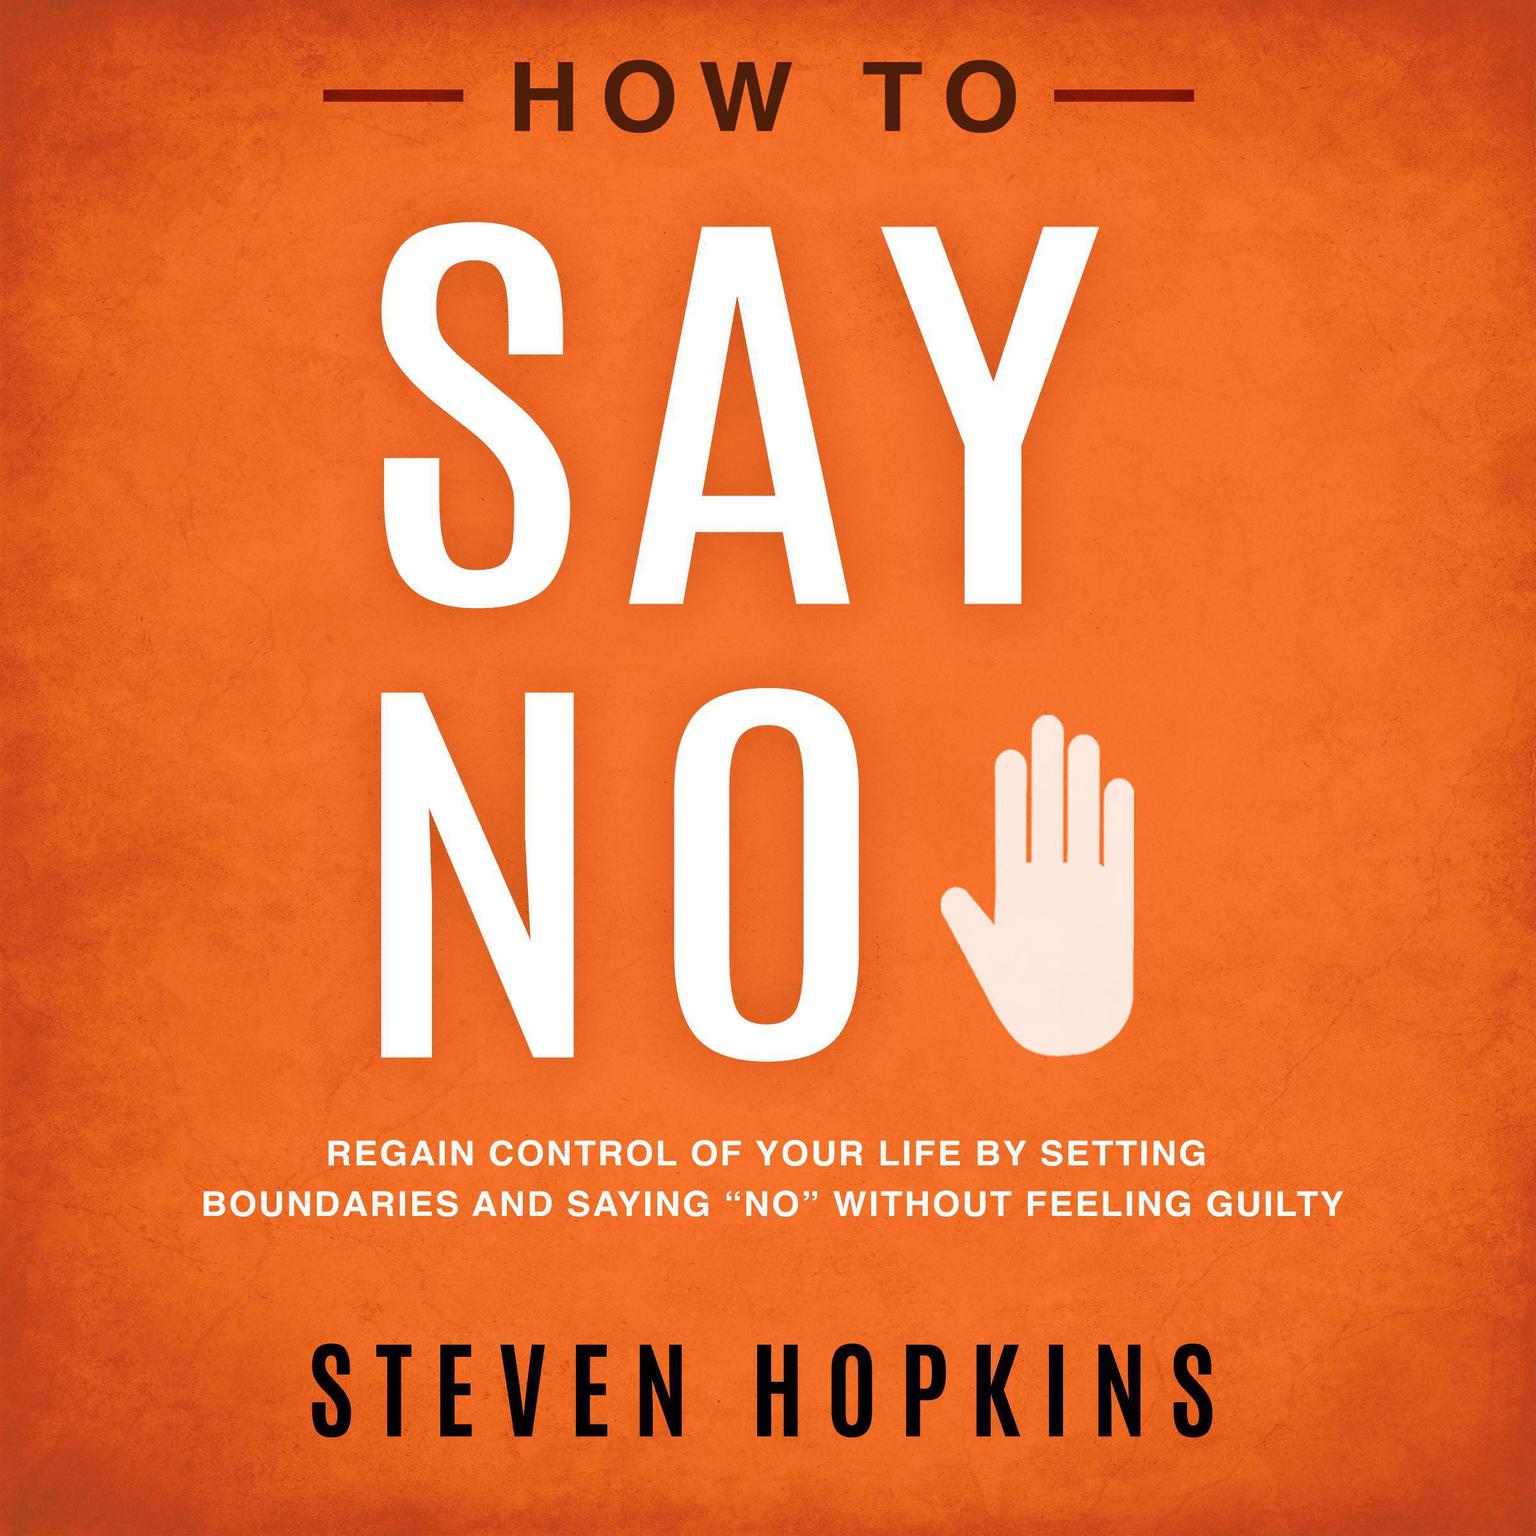 How to Say No: Regain Control of Your Life by Setting Boundaries and Saying “No” Without Feeling Guilty  Audiobook, by Steven Hopkins